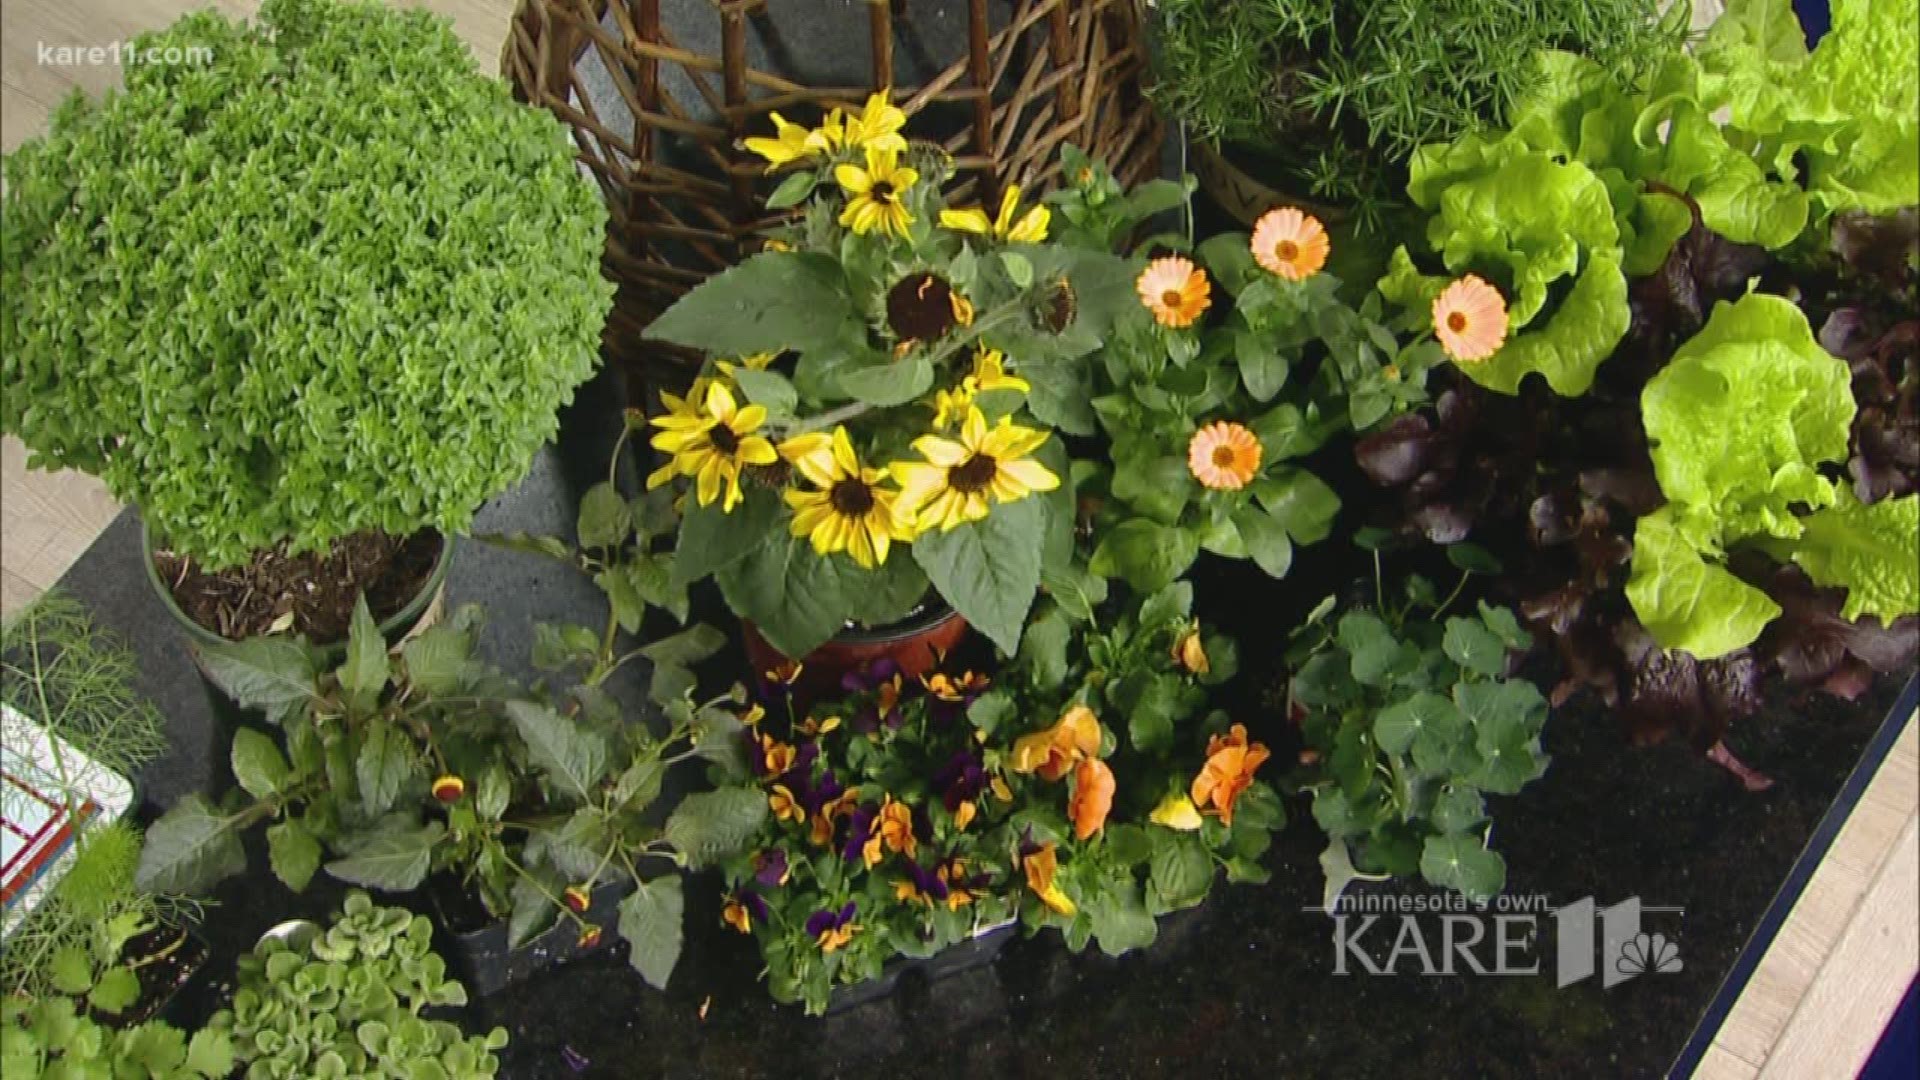 Heidi Heiland has some tips on how to create beautiful and functional yards.